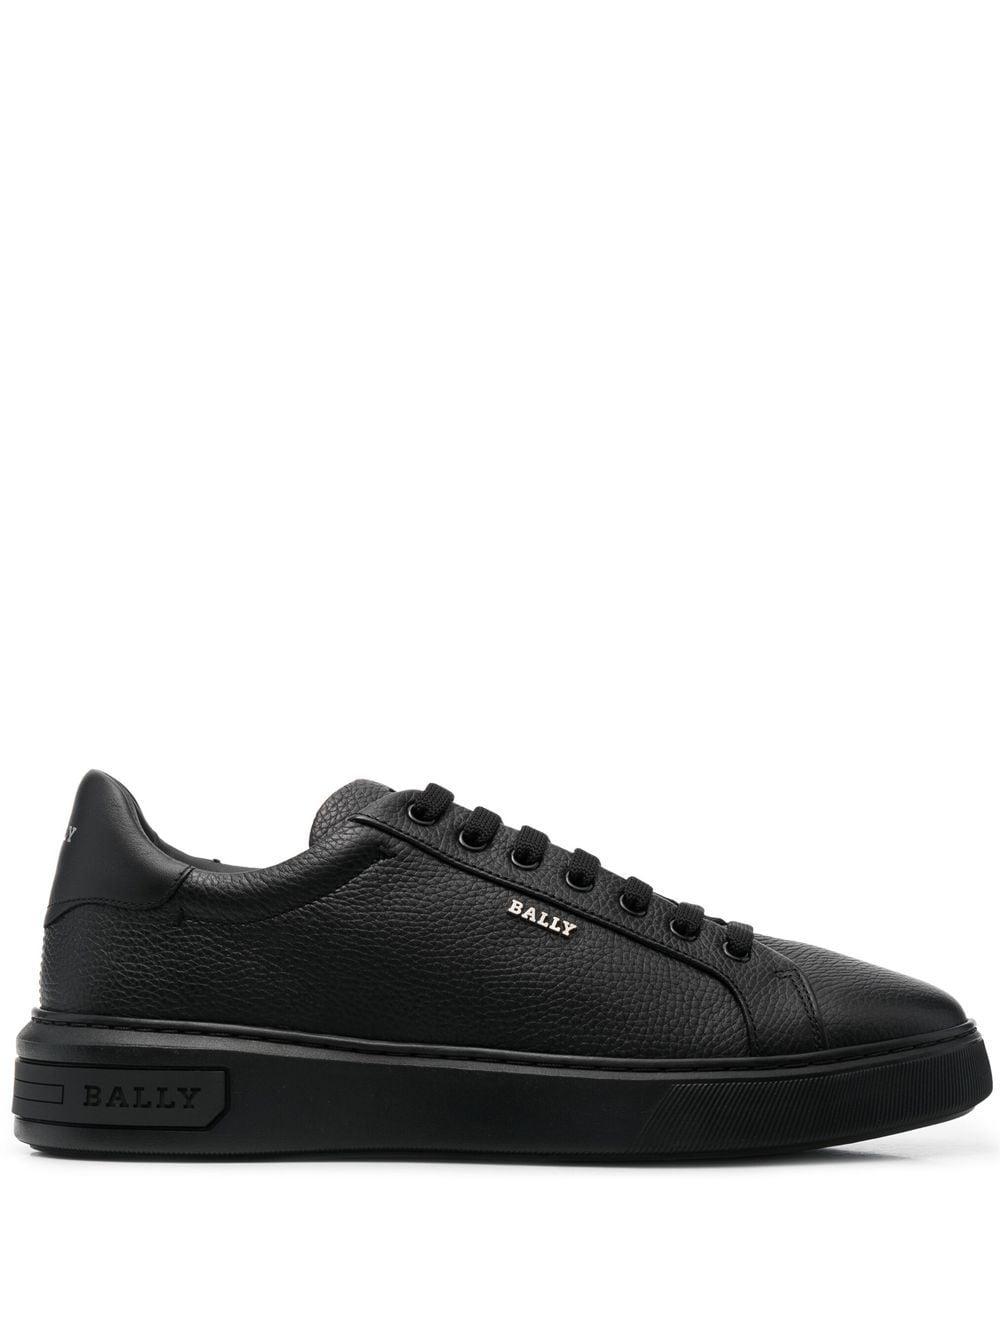 Bally Miky-pebbled Low-top Sneakers in Black for Men | Lyst